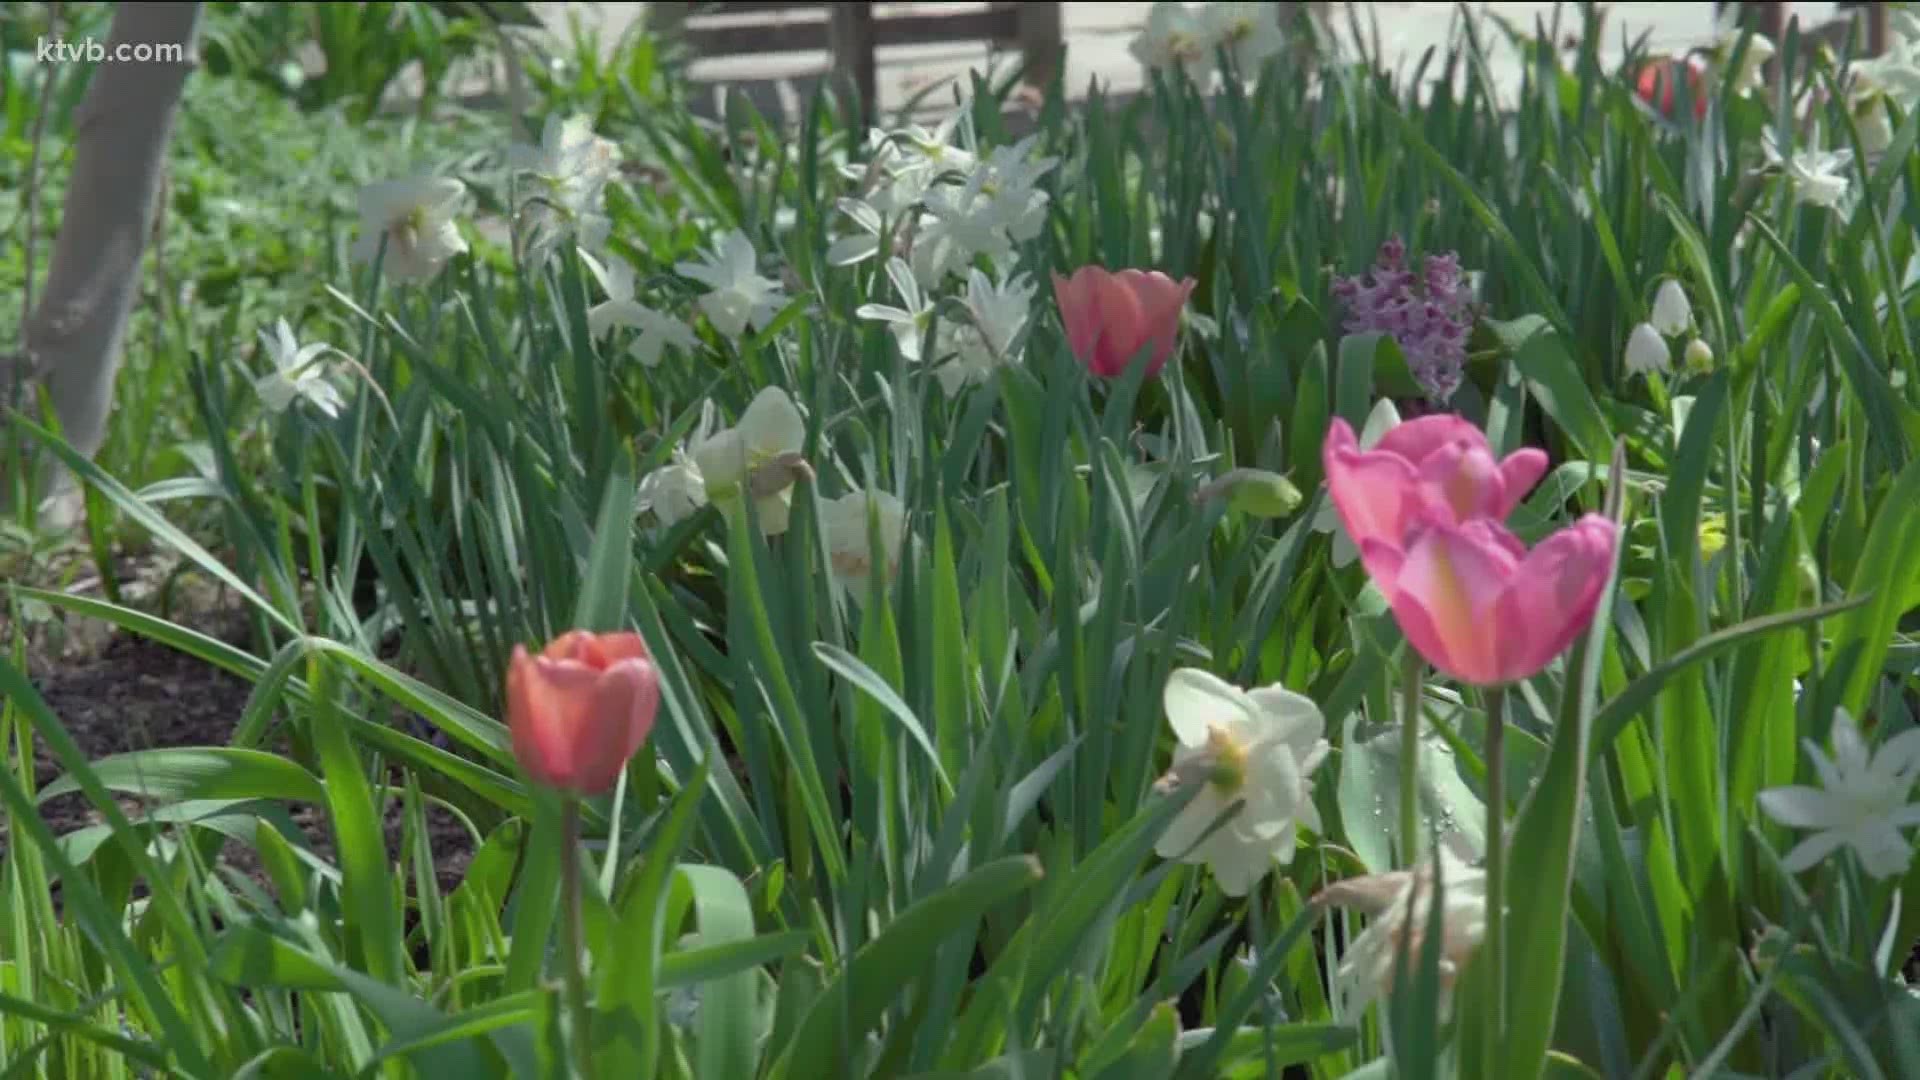 The garden was able to raise more than $182,000 to stay open during the coronavirus pandemic.